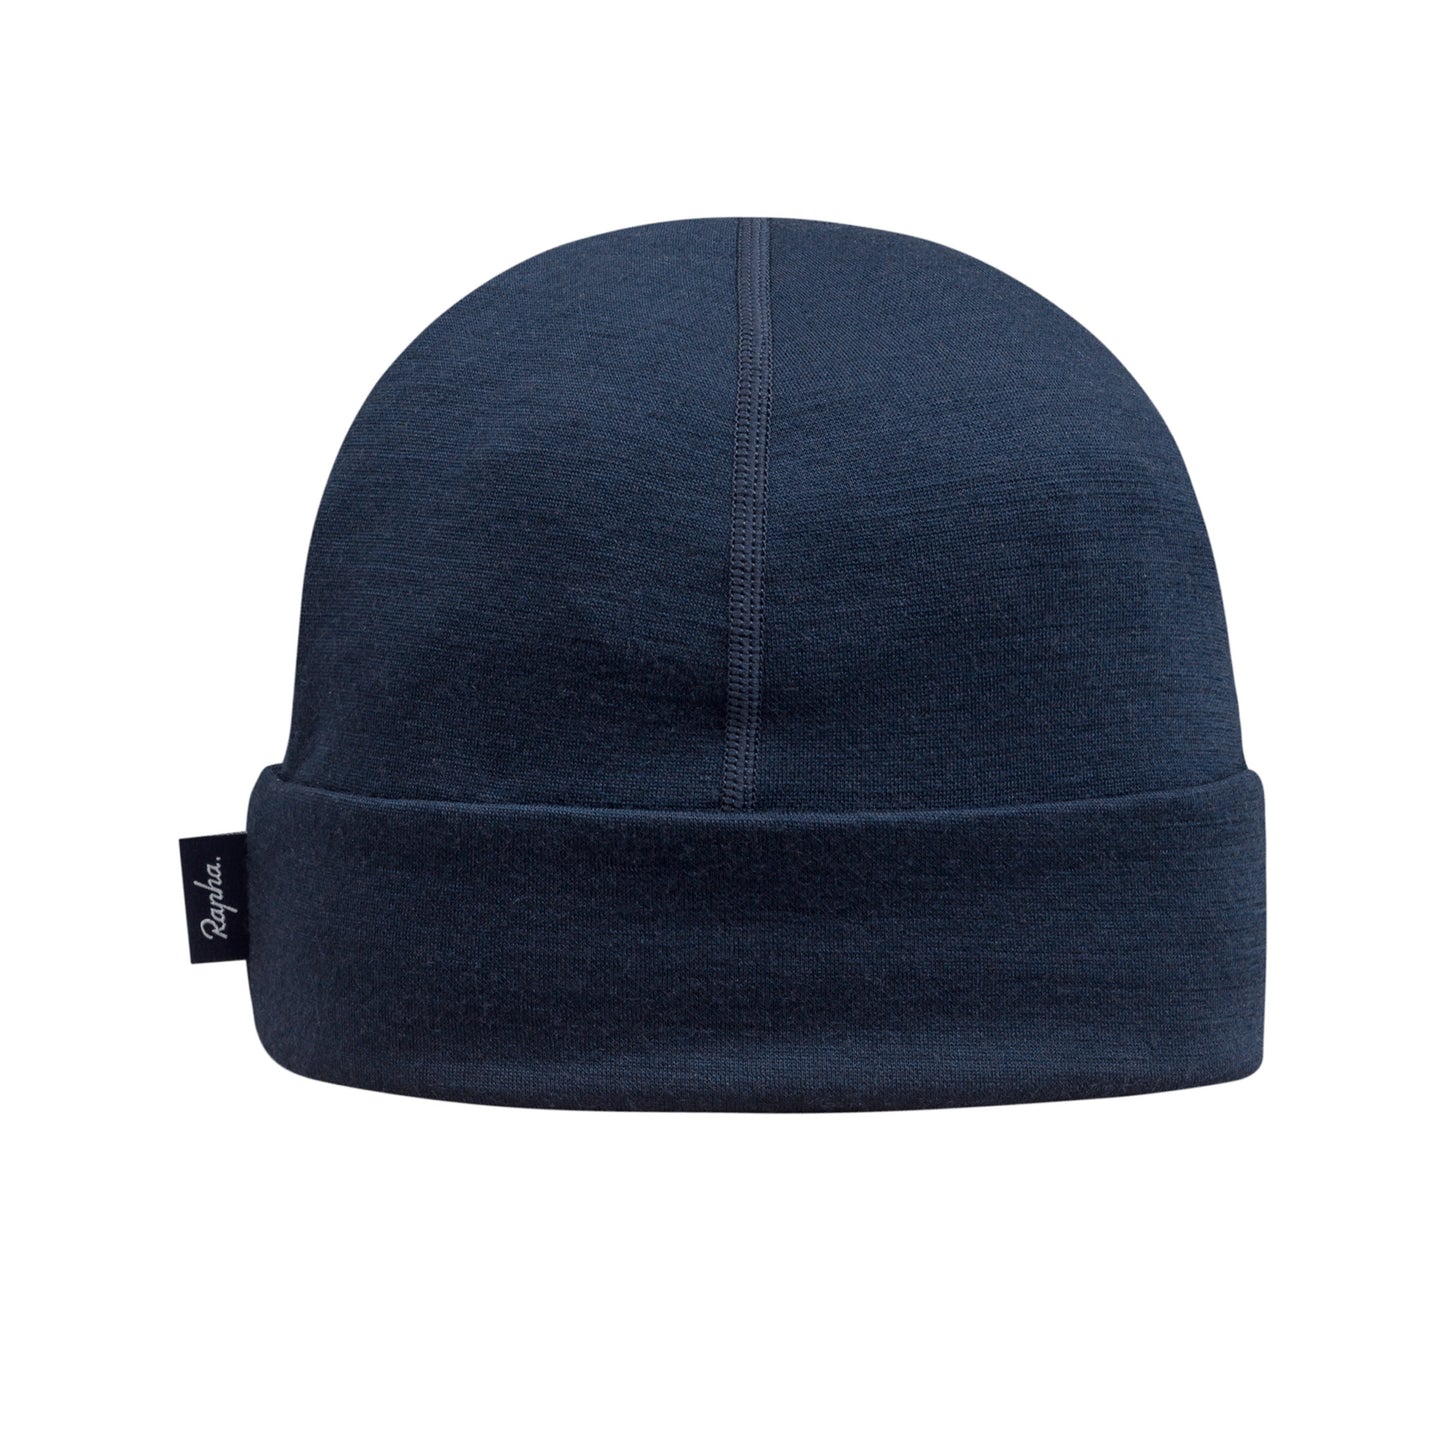 Rapha Unisex Merino Hat - Navy One Size Fits All buy online at Woolys Wheels